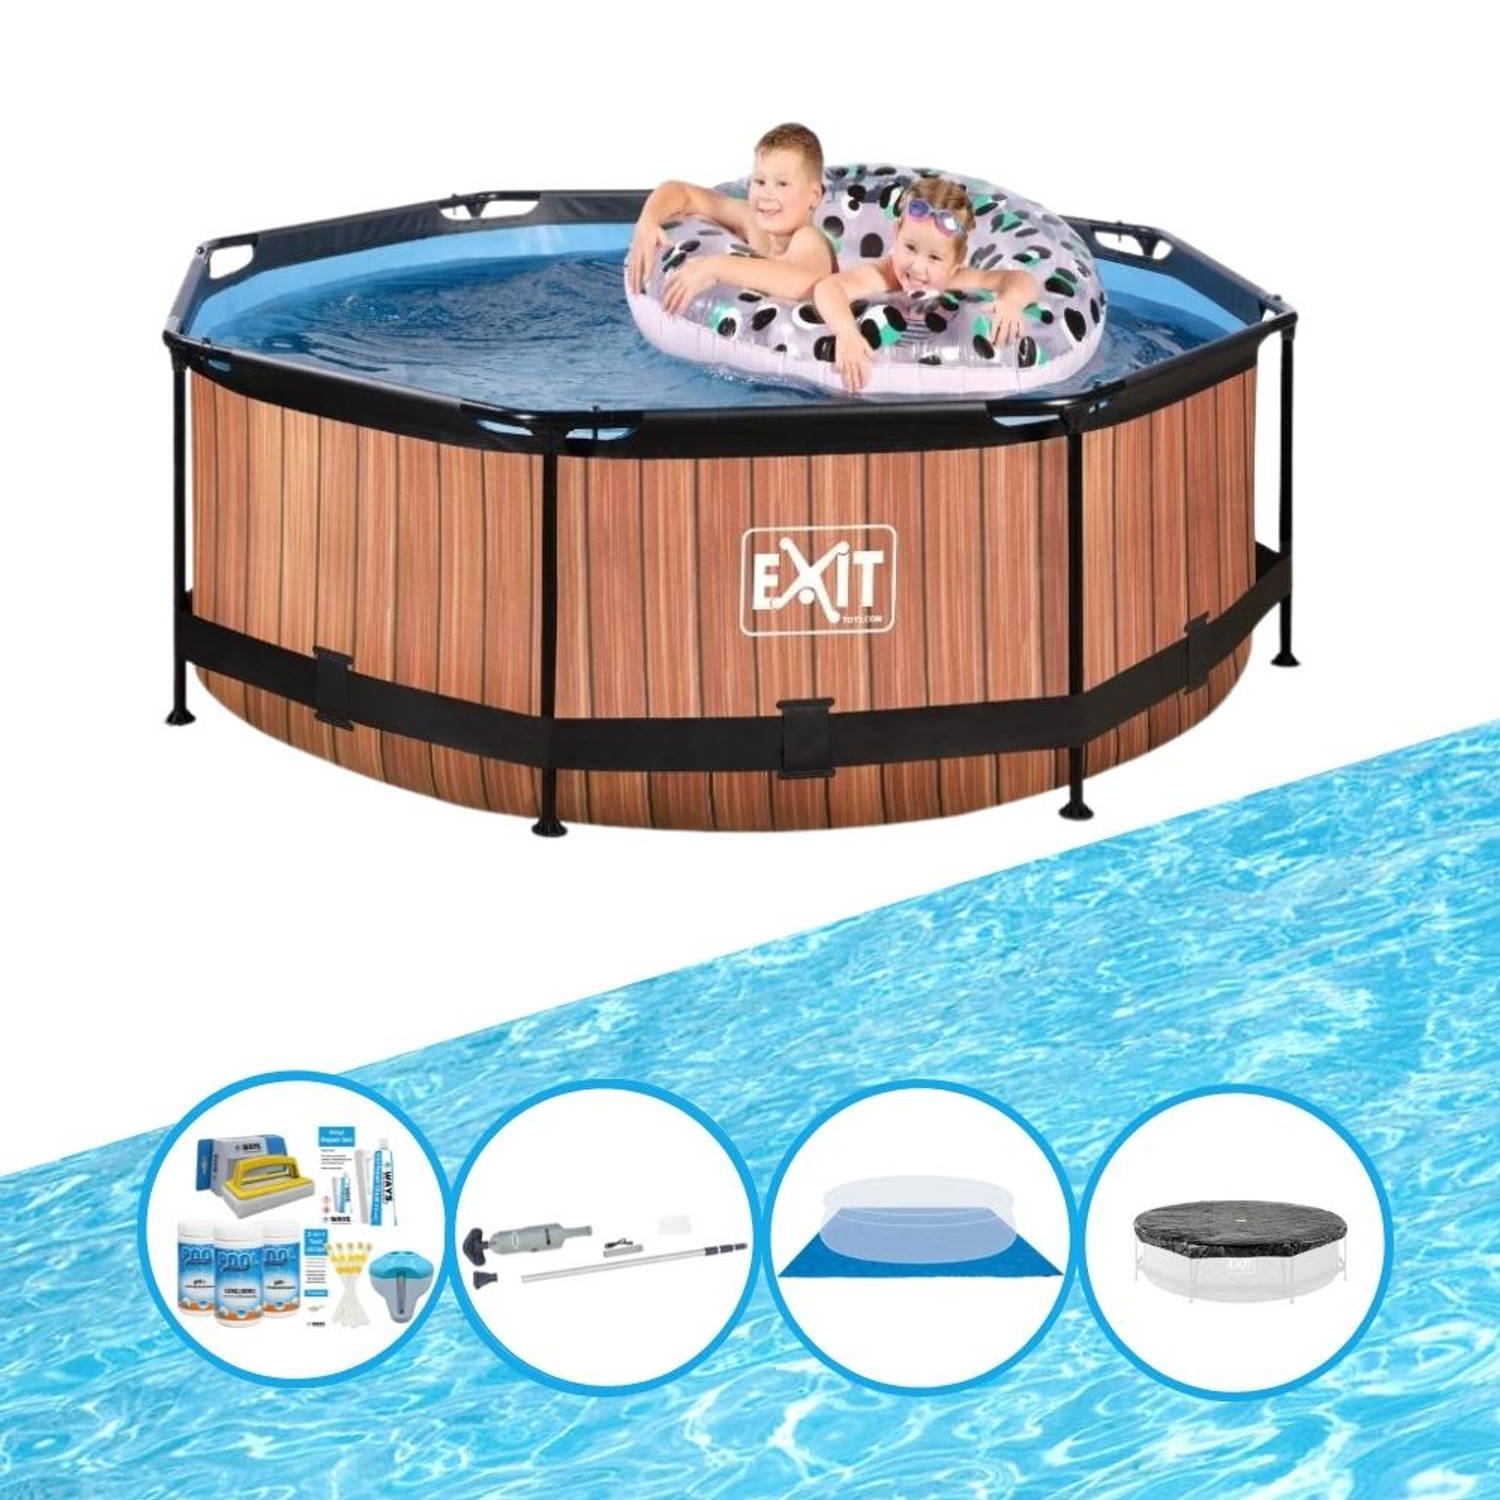 EXIT Zwembad Timber Style - Frame Pool ø244x76cm - Complete zwembadset